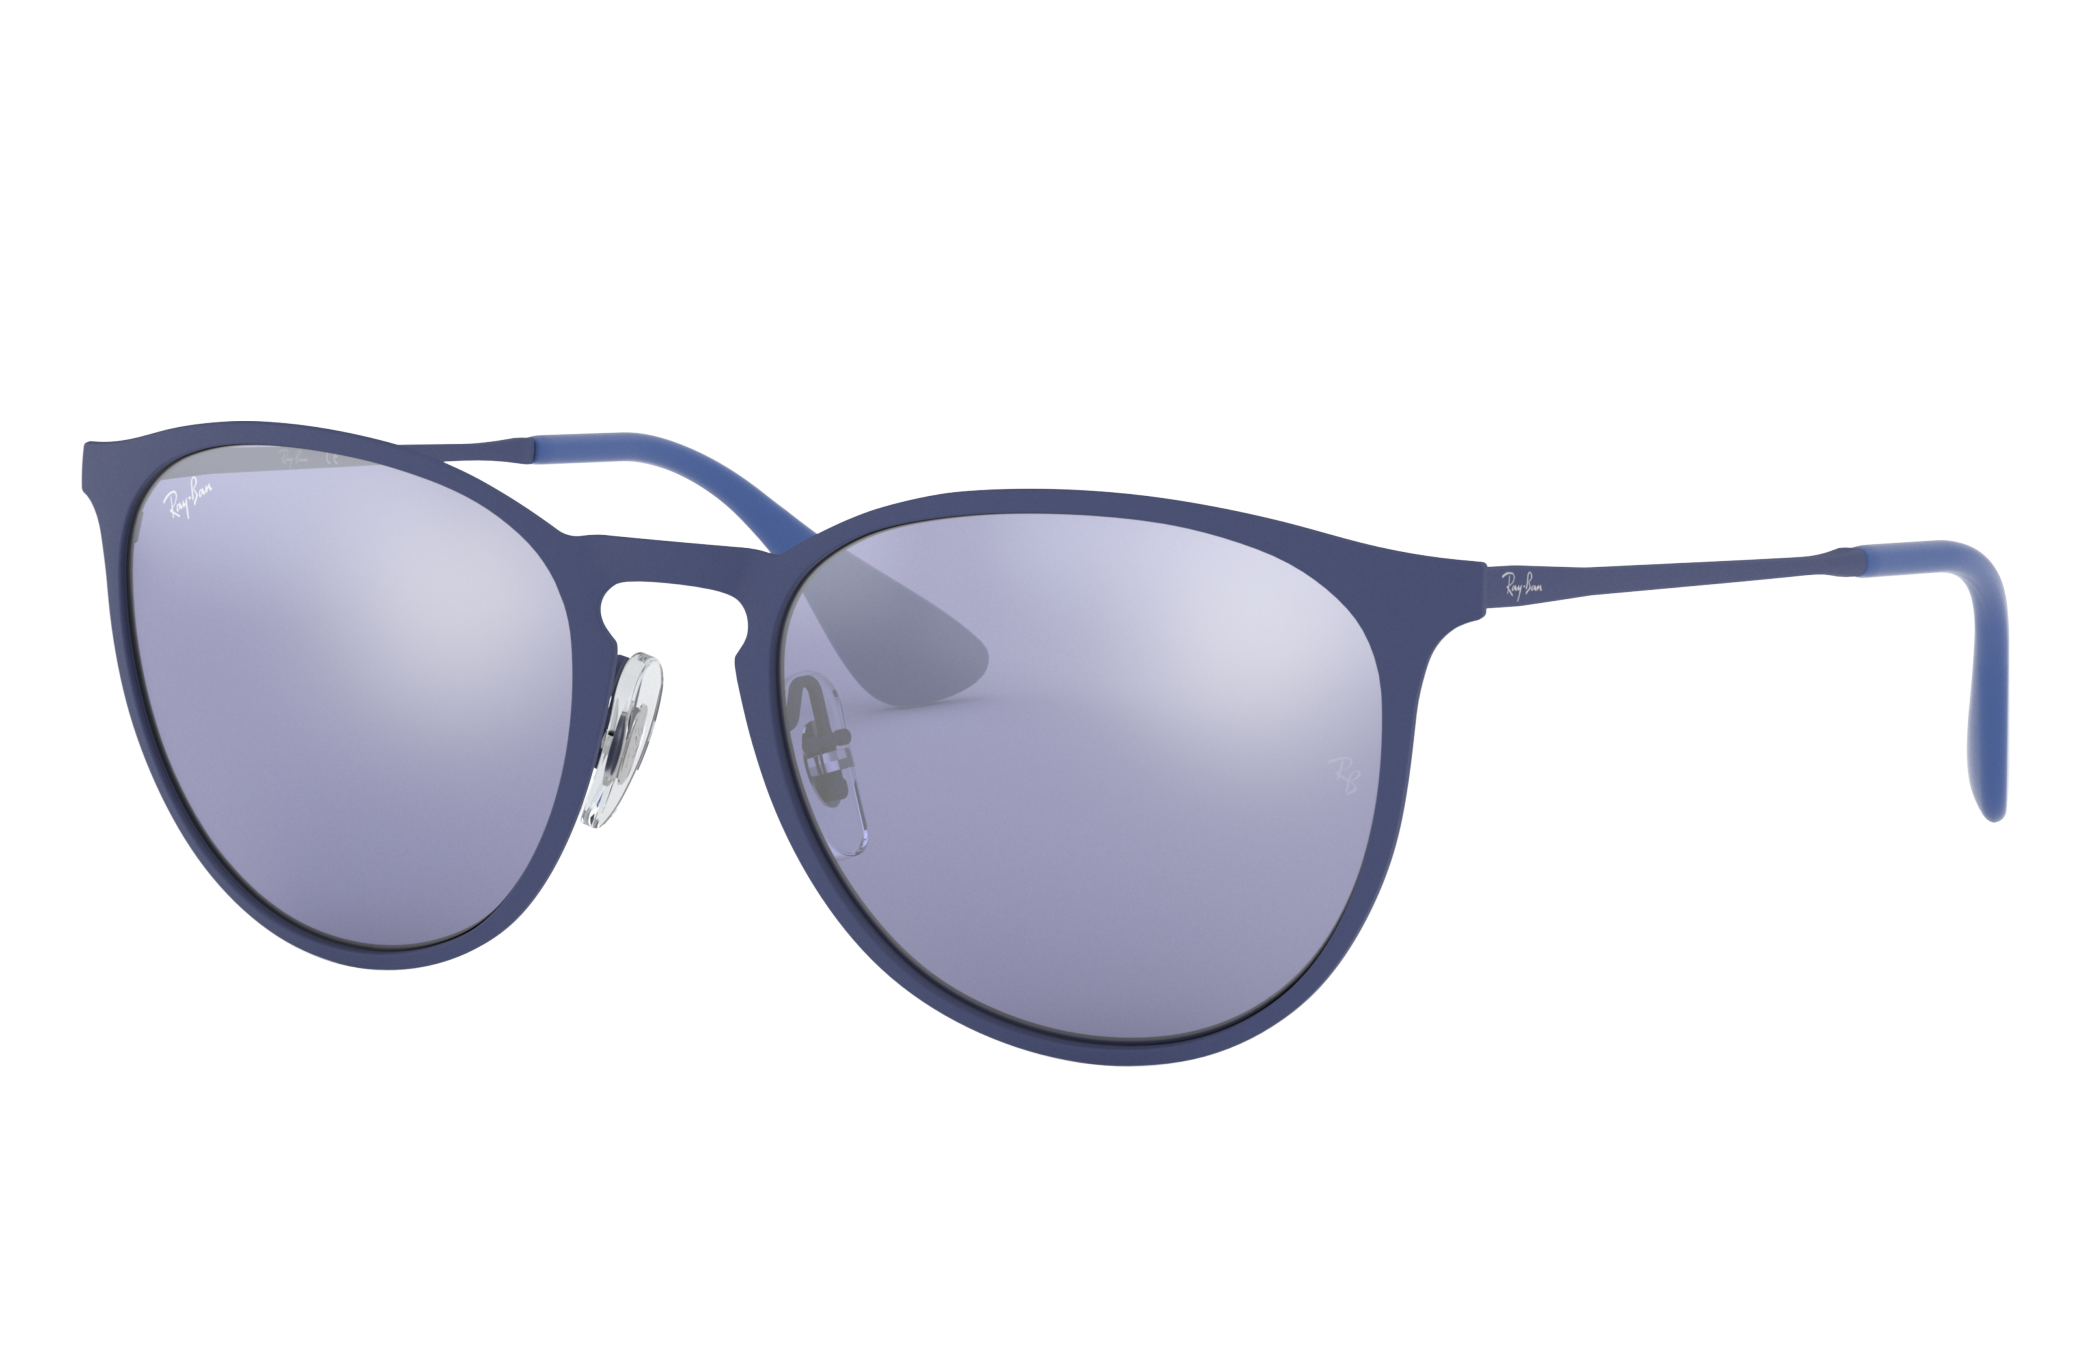 ERIKA METAL Sunglasses in Blue and Grey - RB3539 | Ray-Ban® US